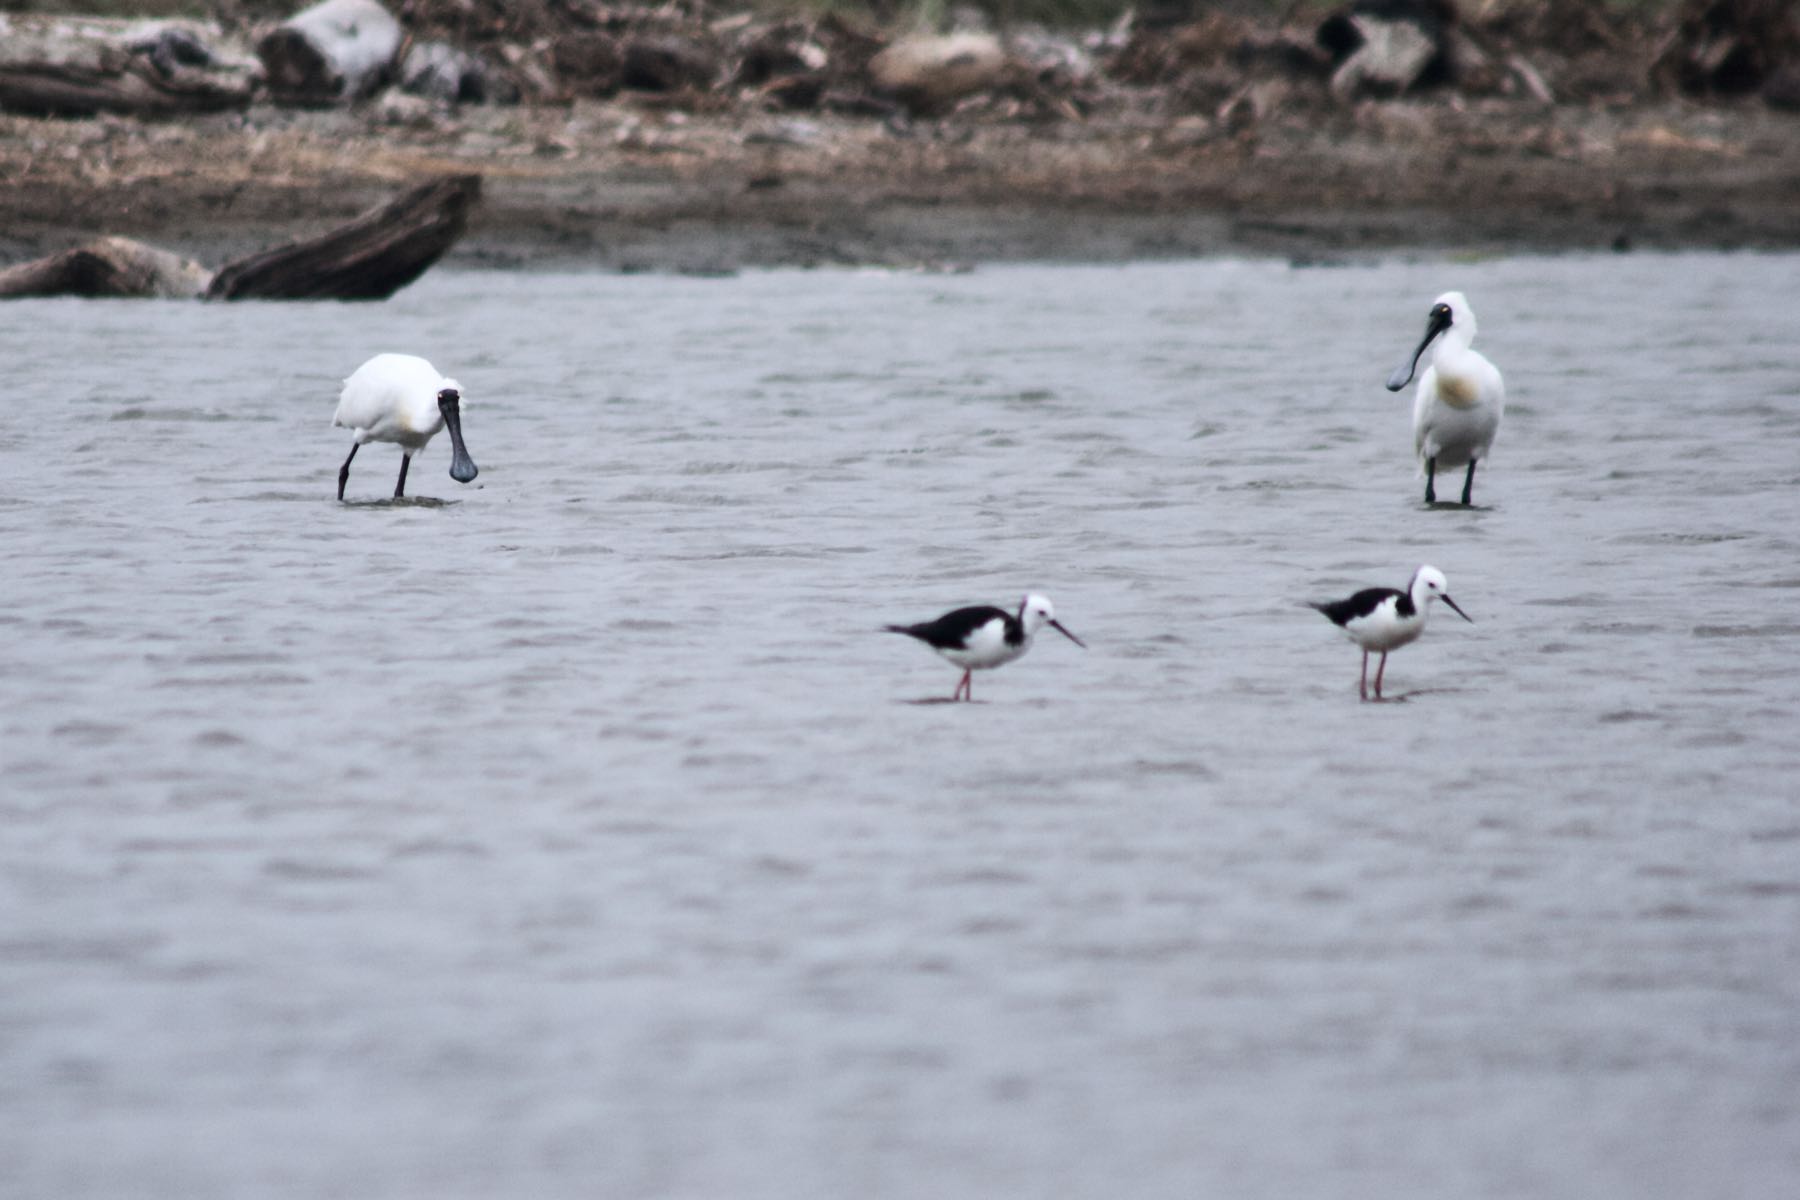 Two large white birds and two small black and white birds wading by the beach.